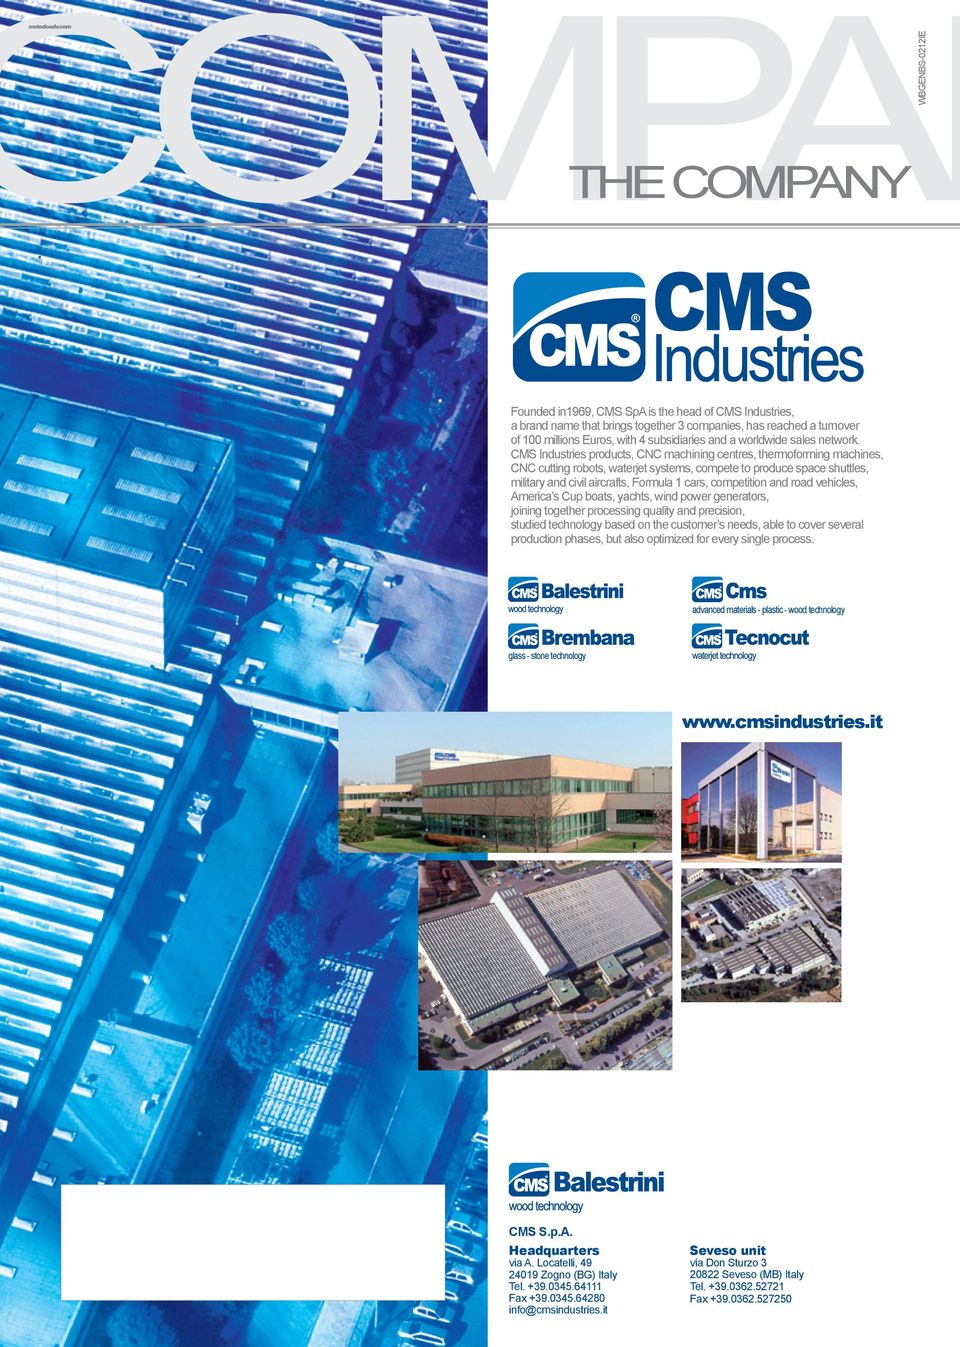 CMS Industries products, CNC machining centres, thermoforming machines, CNC cutting robots, waterjet systems, compete to produce space shuttles, military and civil aircrafts, Formula 1 cars,